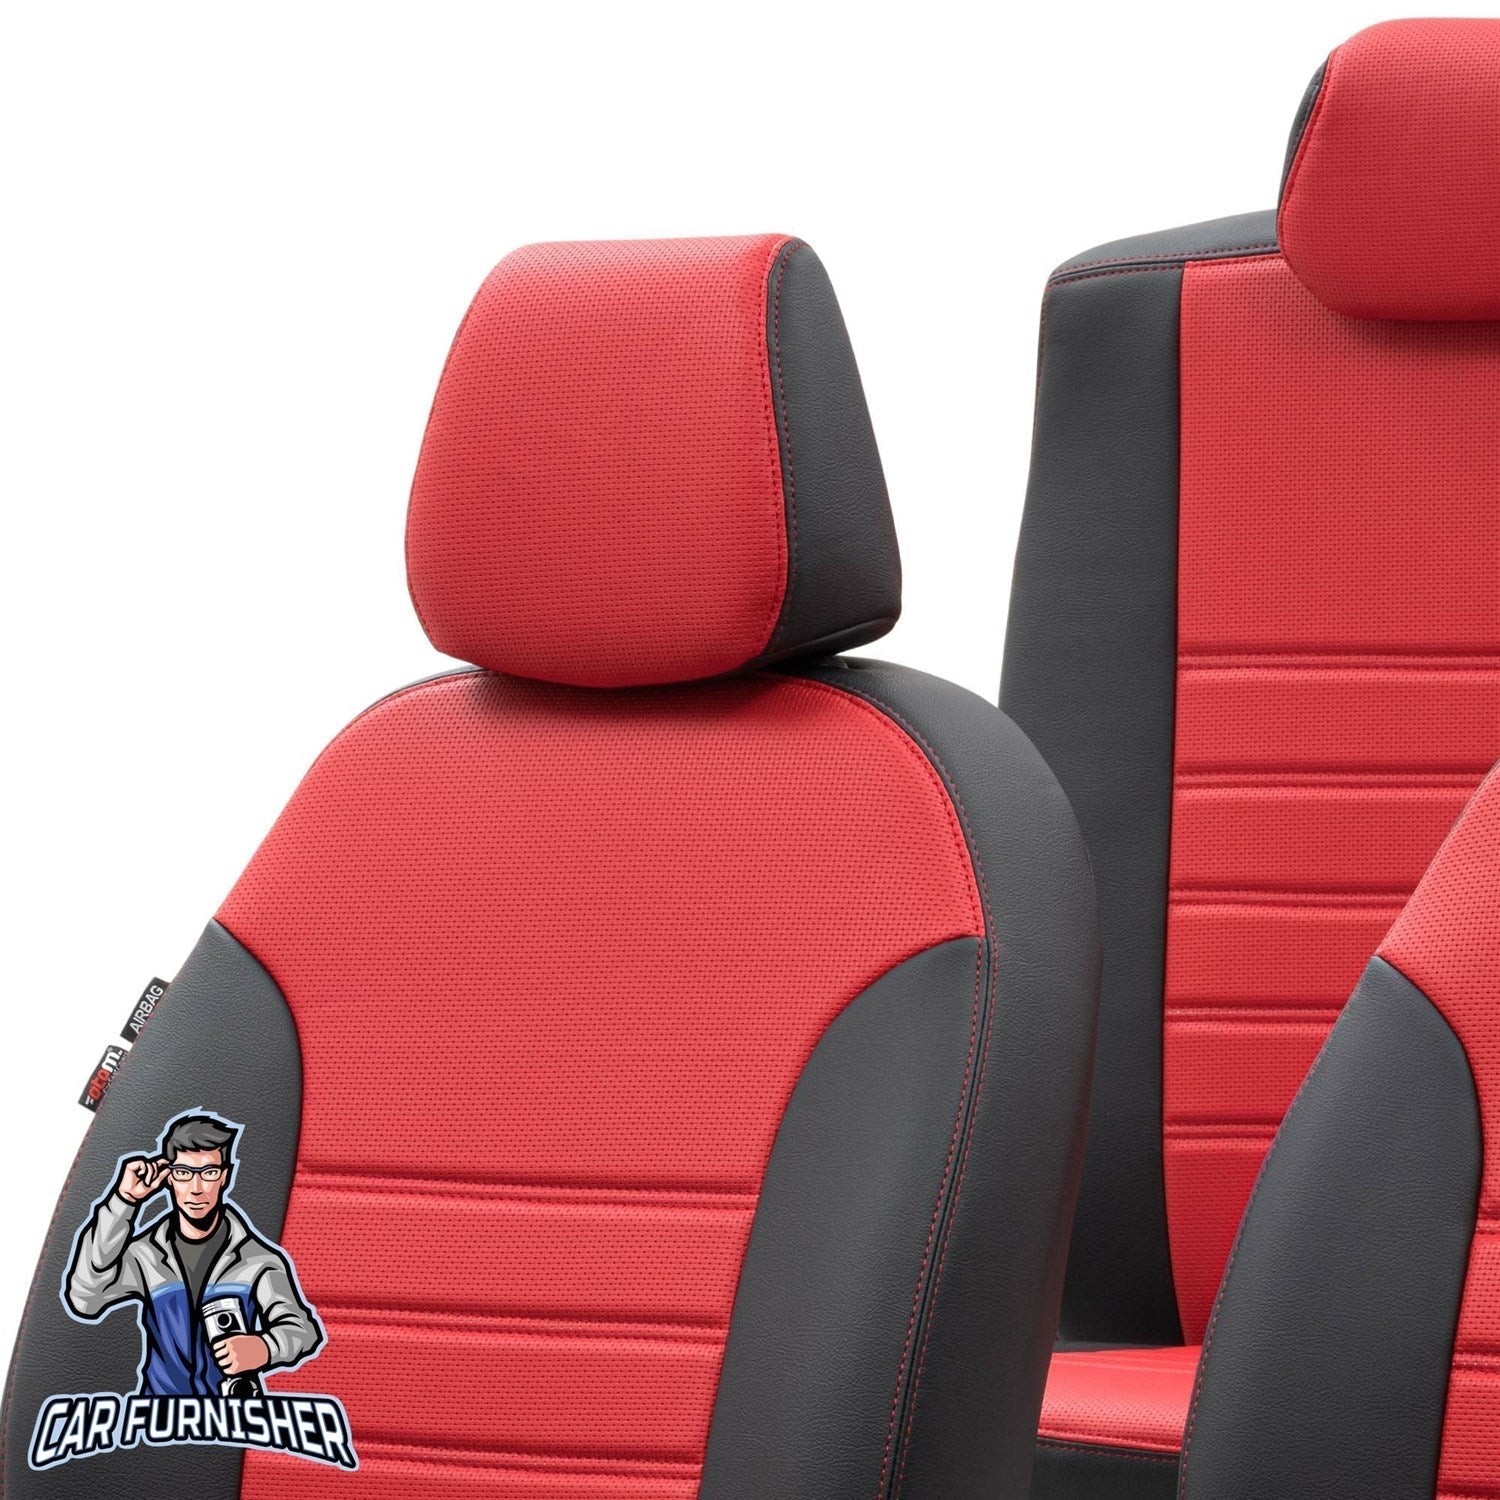 Skoda Roomstar Seat Cover New York Leather Design Red Leather